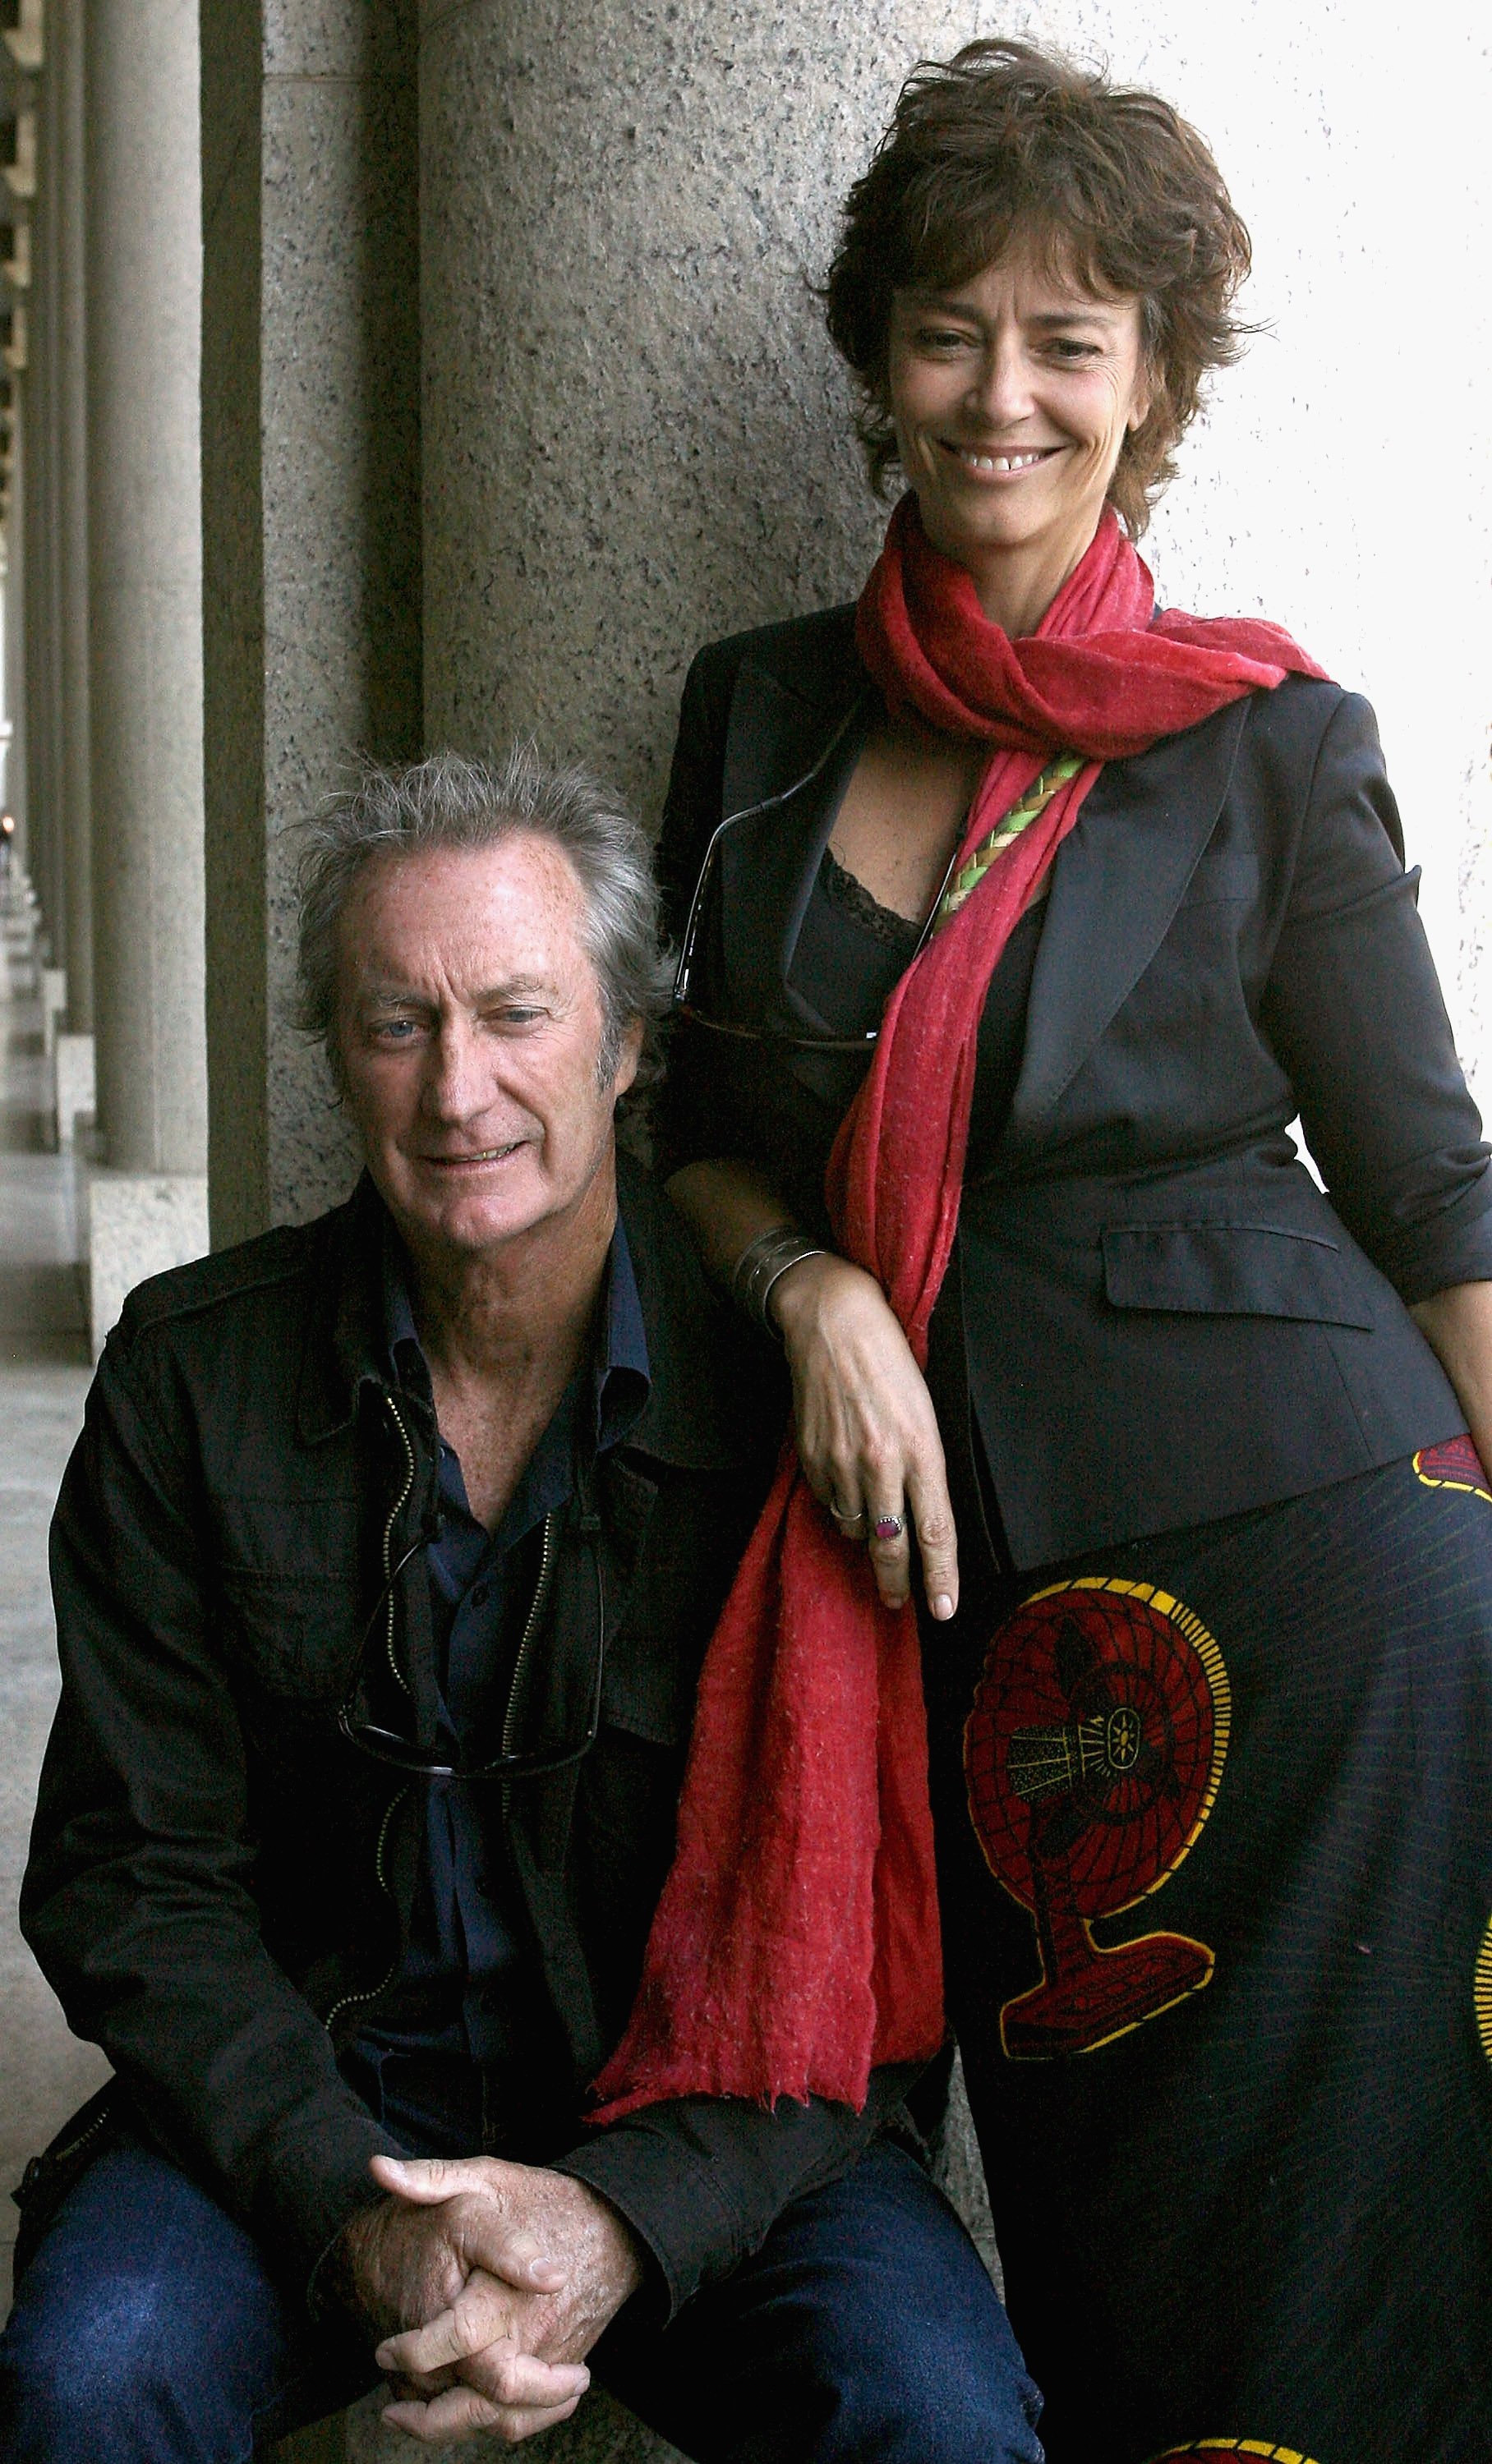 Actor Bryan Brown poses with his wife, director Rachel Ward at the Dendy Opera Quays on May 14, 2009 in Sydney, Australia | Source: Getty Images